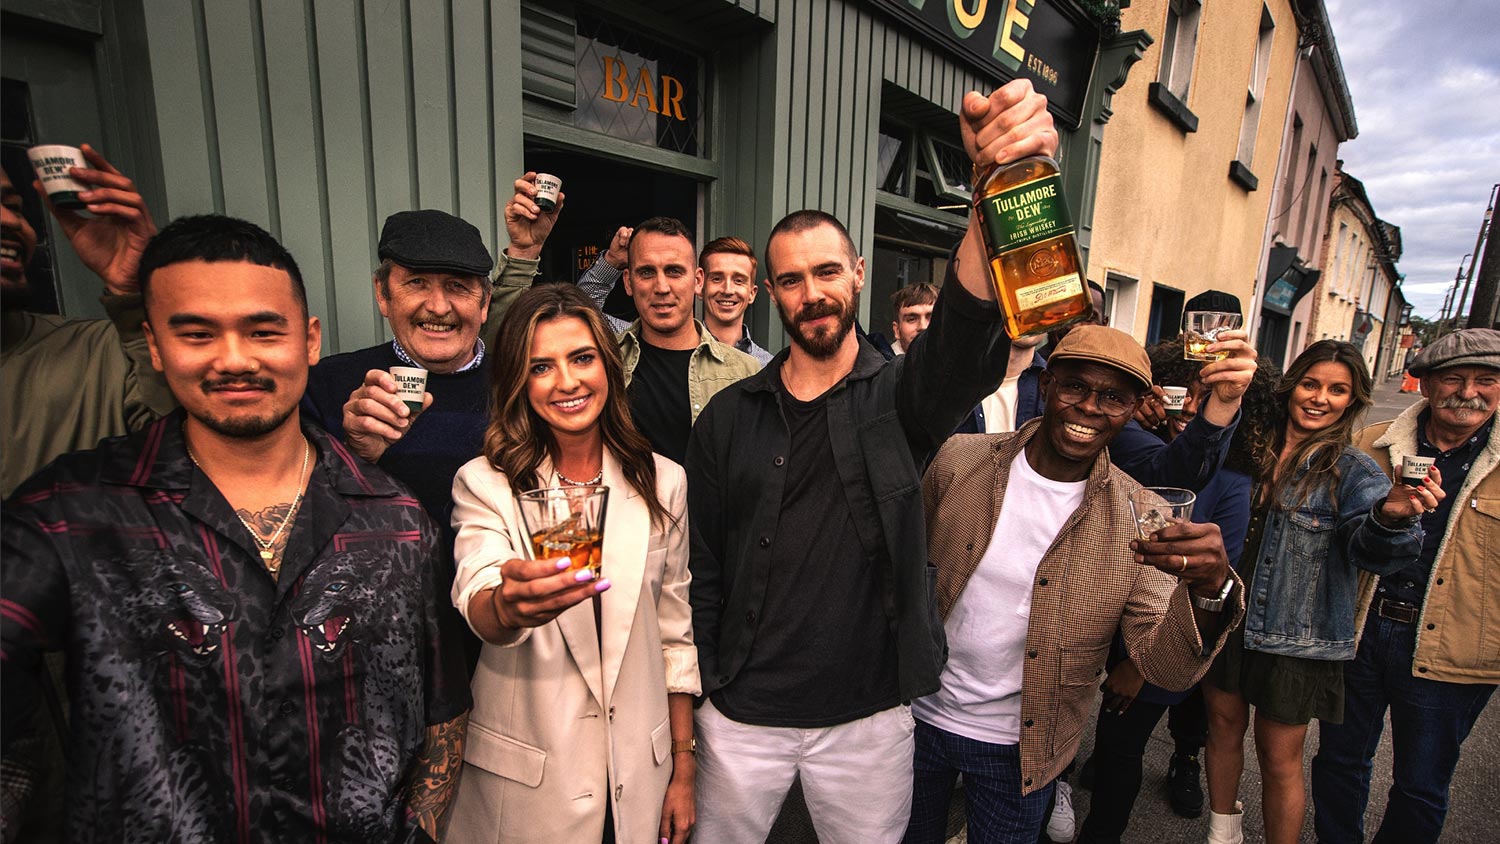 tullamore dew about us